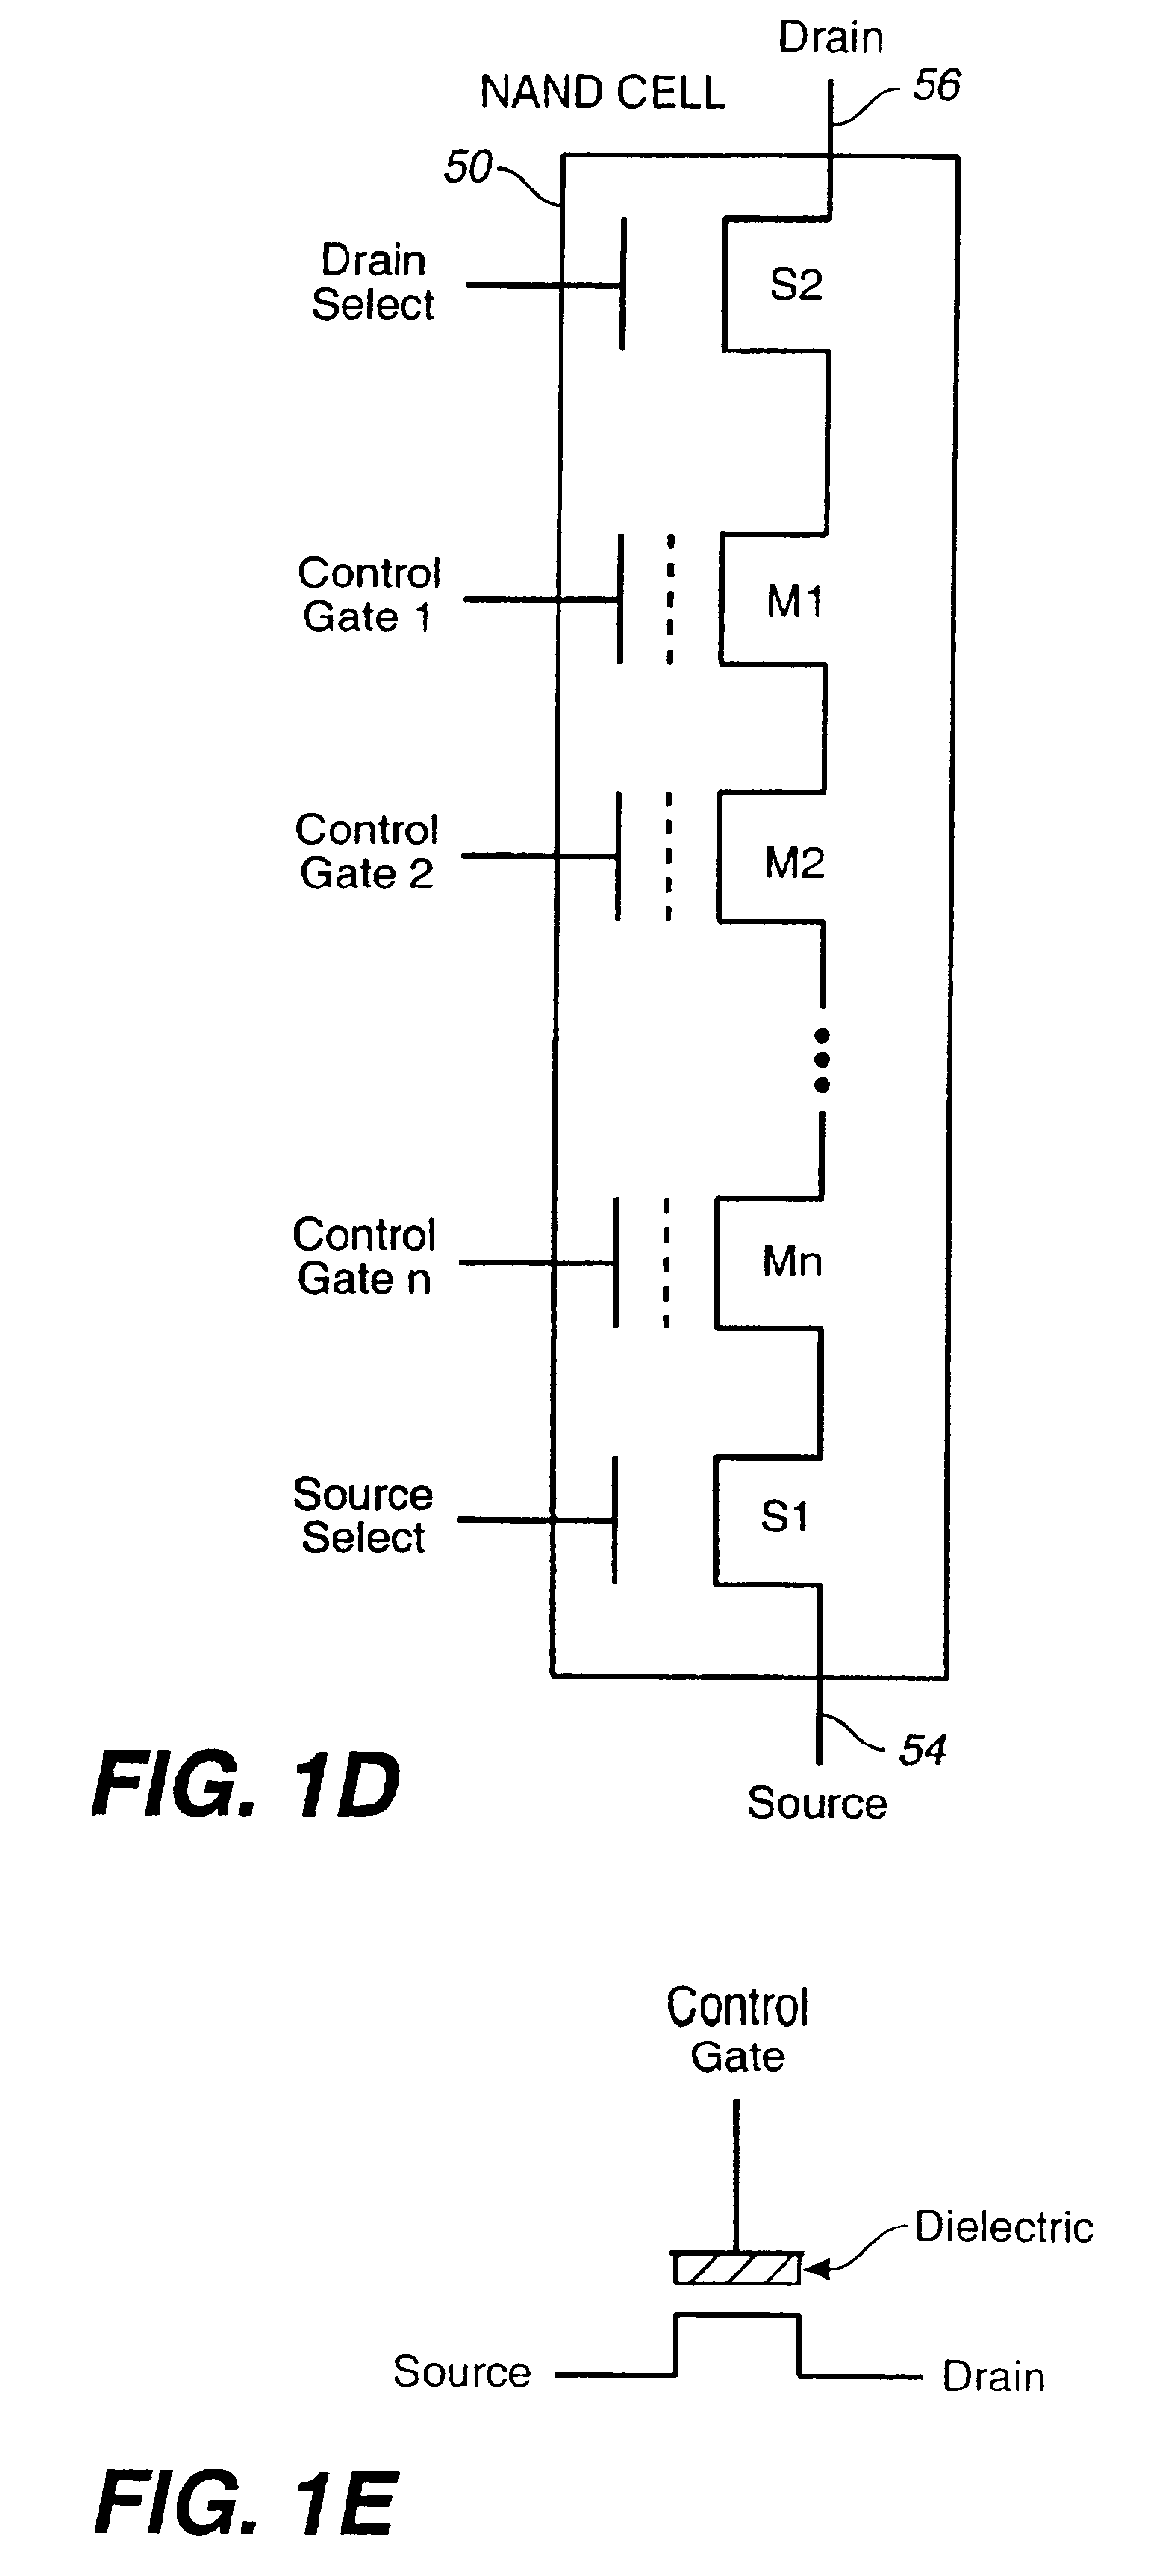 Method for Non-Volatile Memory with Managed Execution of Cached Data